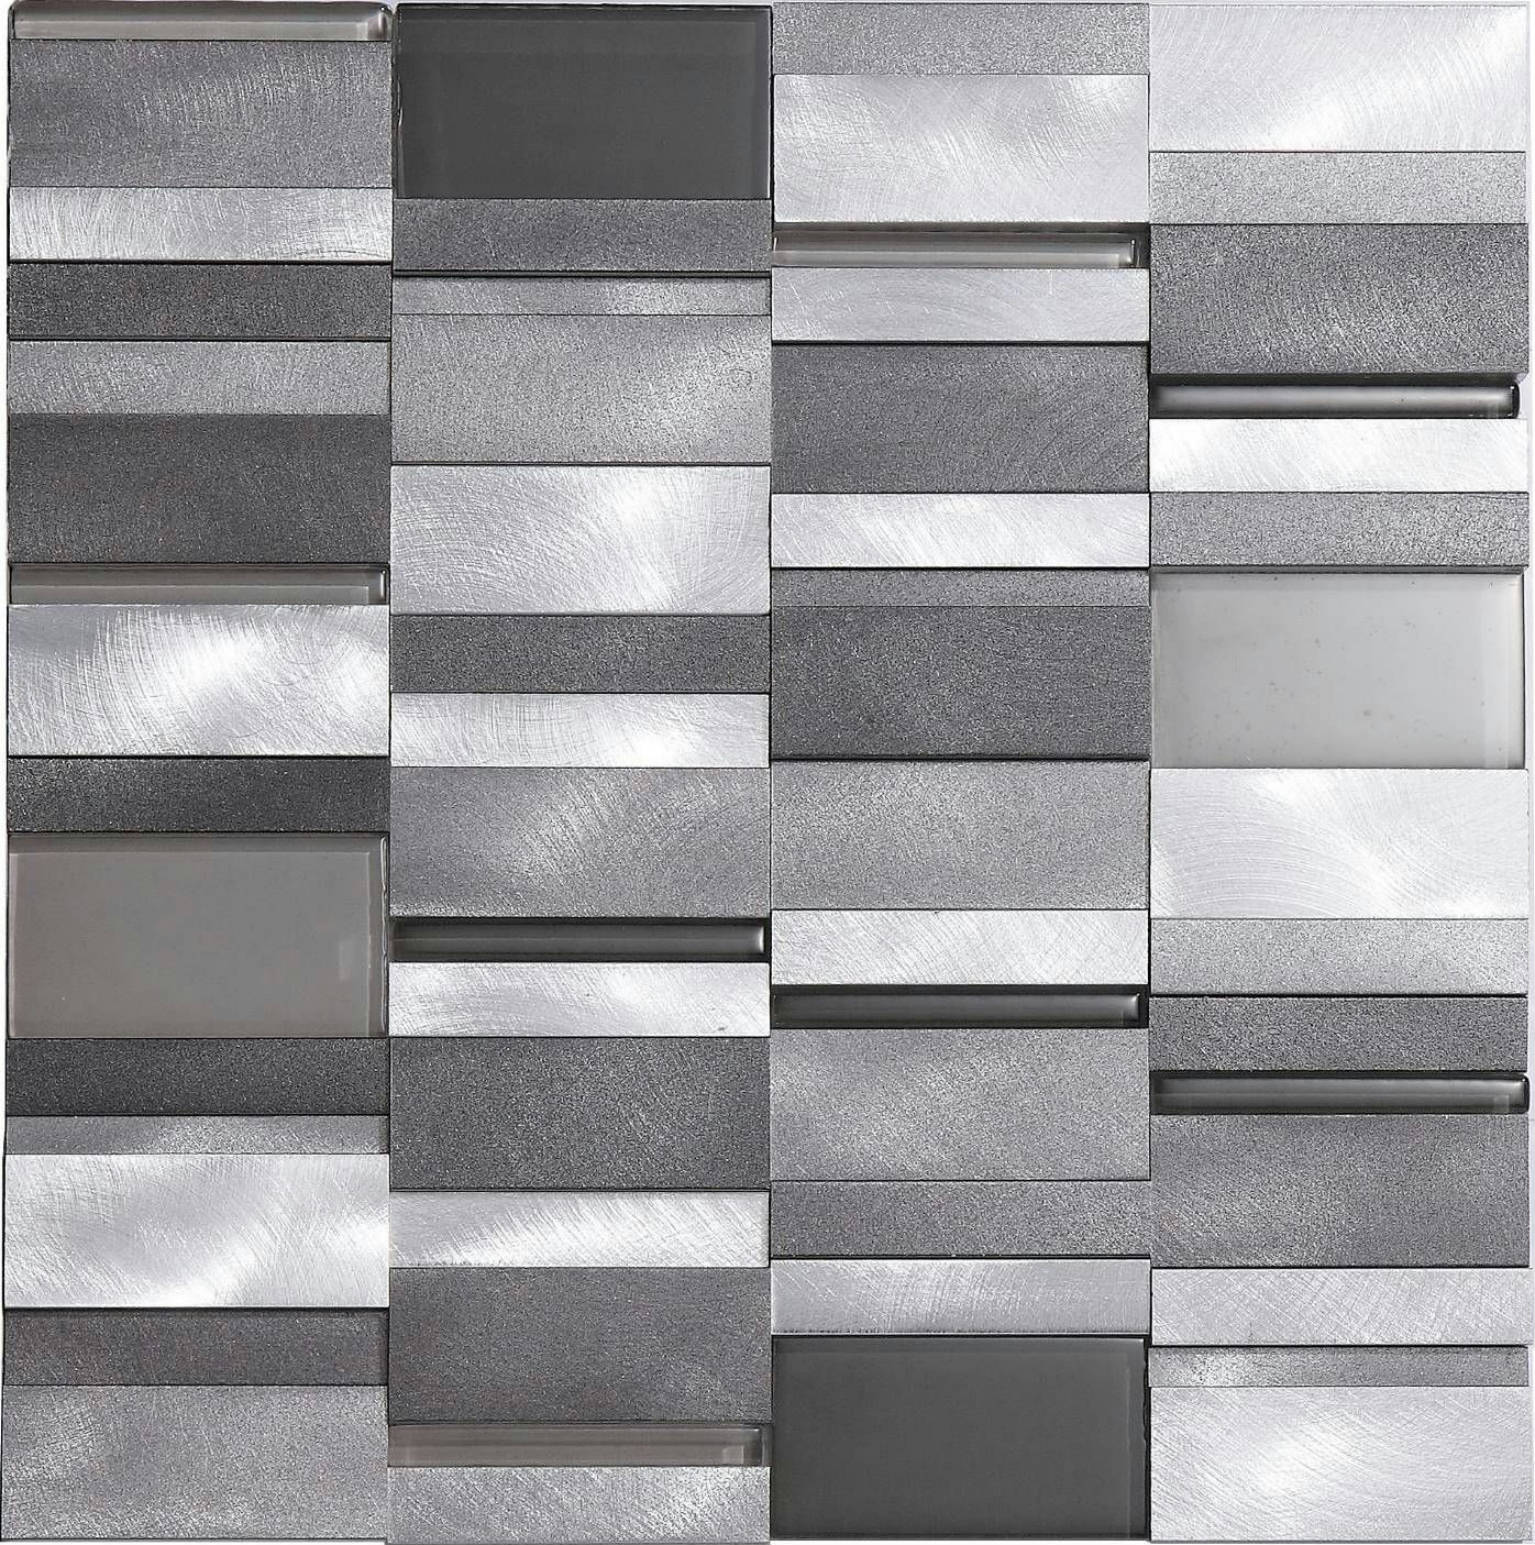 LF2-030 | Stones & More | Finest selection of Mosaics, Glass, Tile and Stone